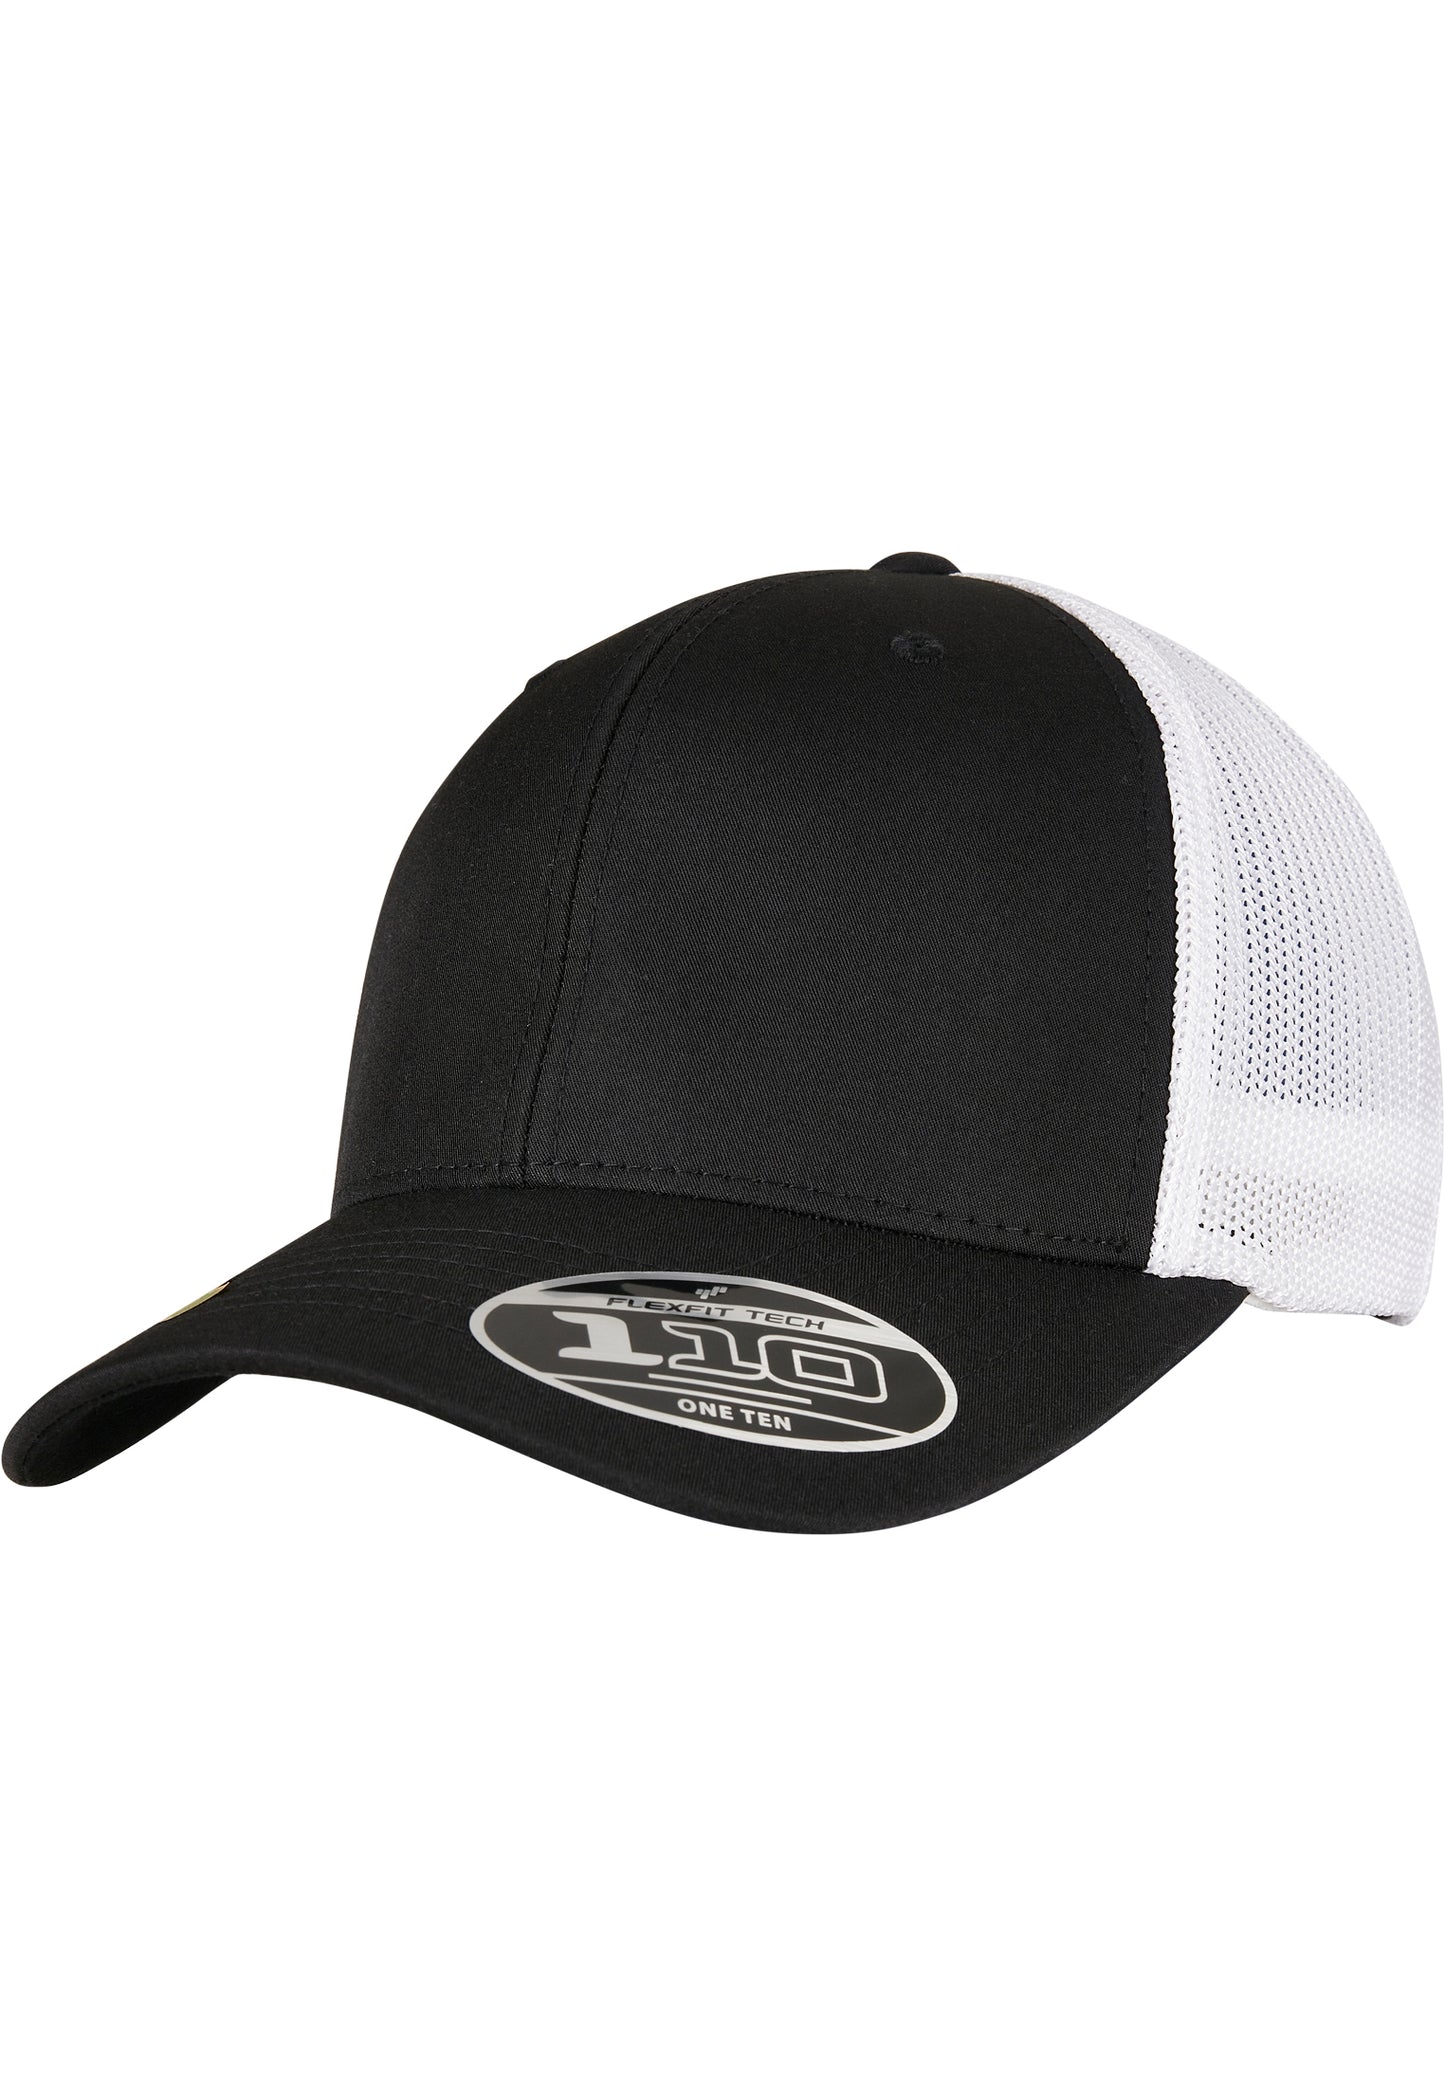 Yupoong FLEXFIT 110 RECYCLED CAP 2-TONE